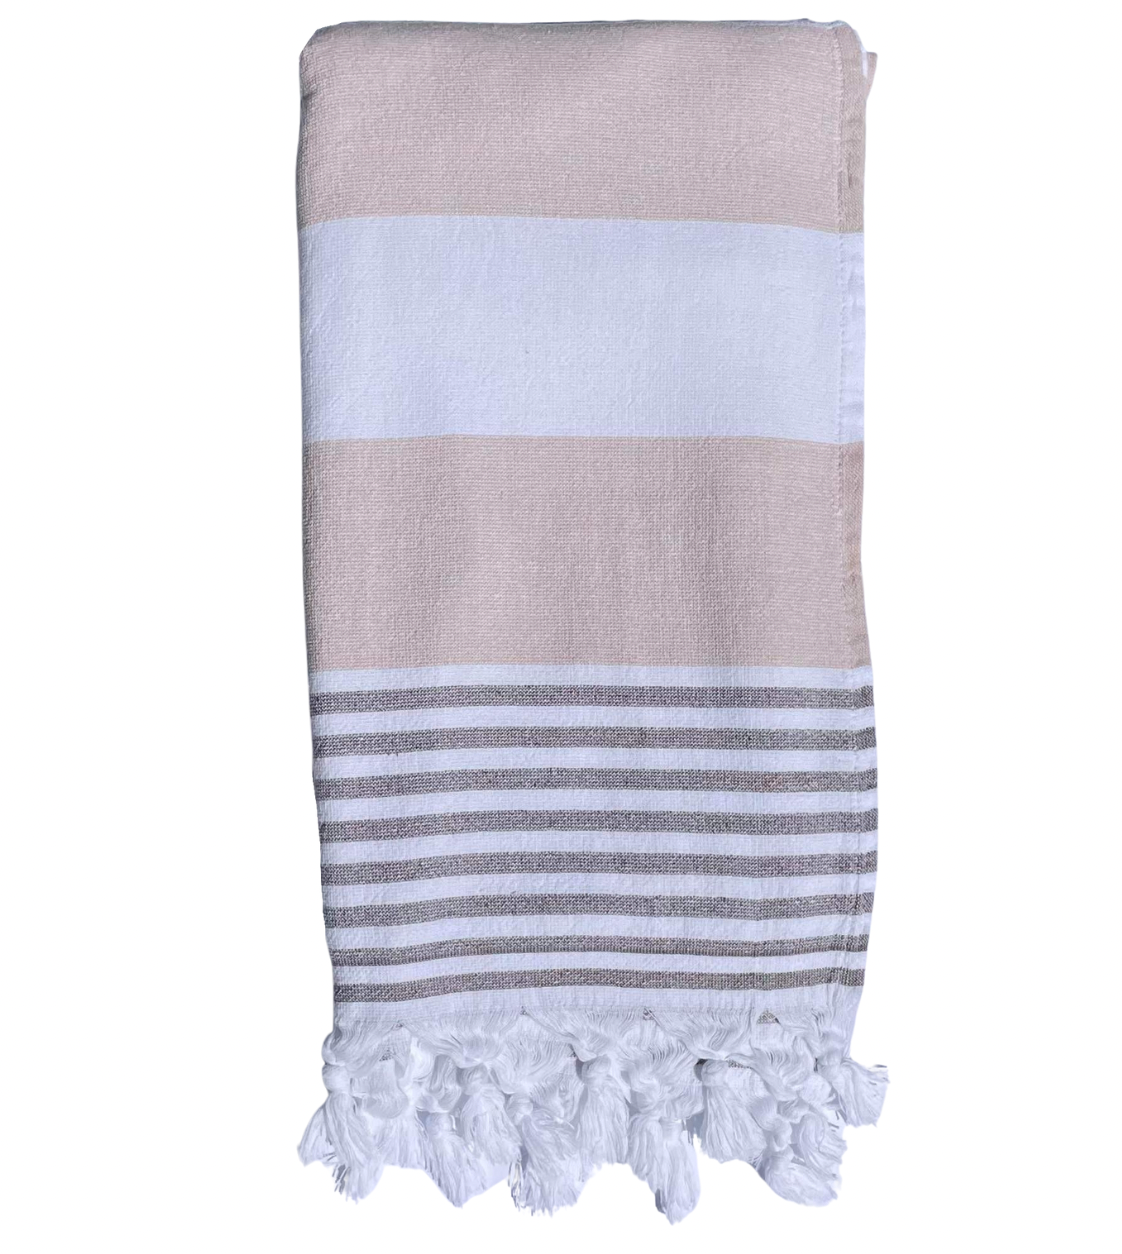 Turkish Towel with Terry Backing - Beige and white